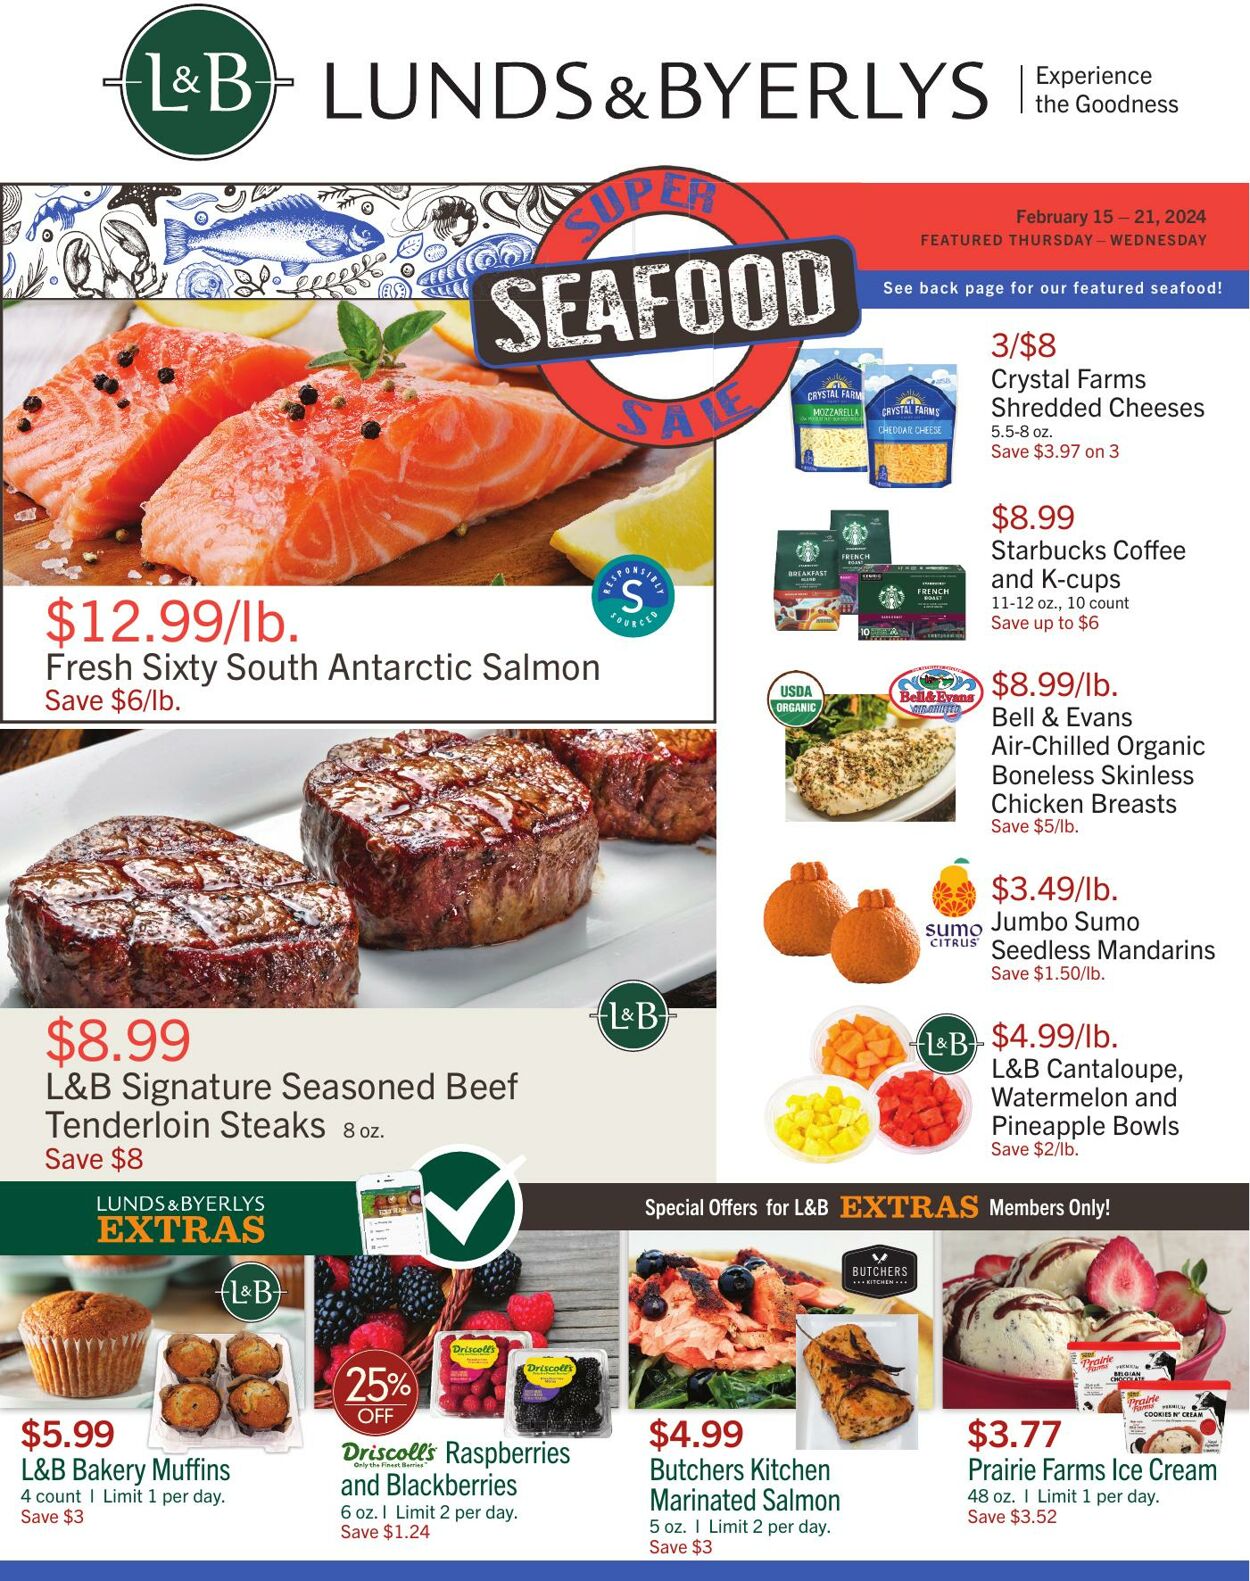 Lunds & Byerlys Promotional weekly ads